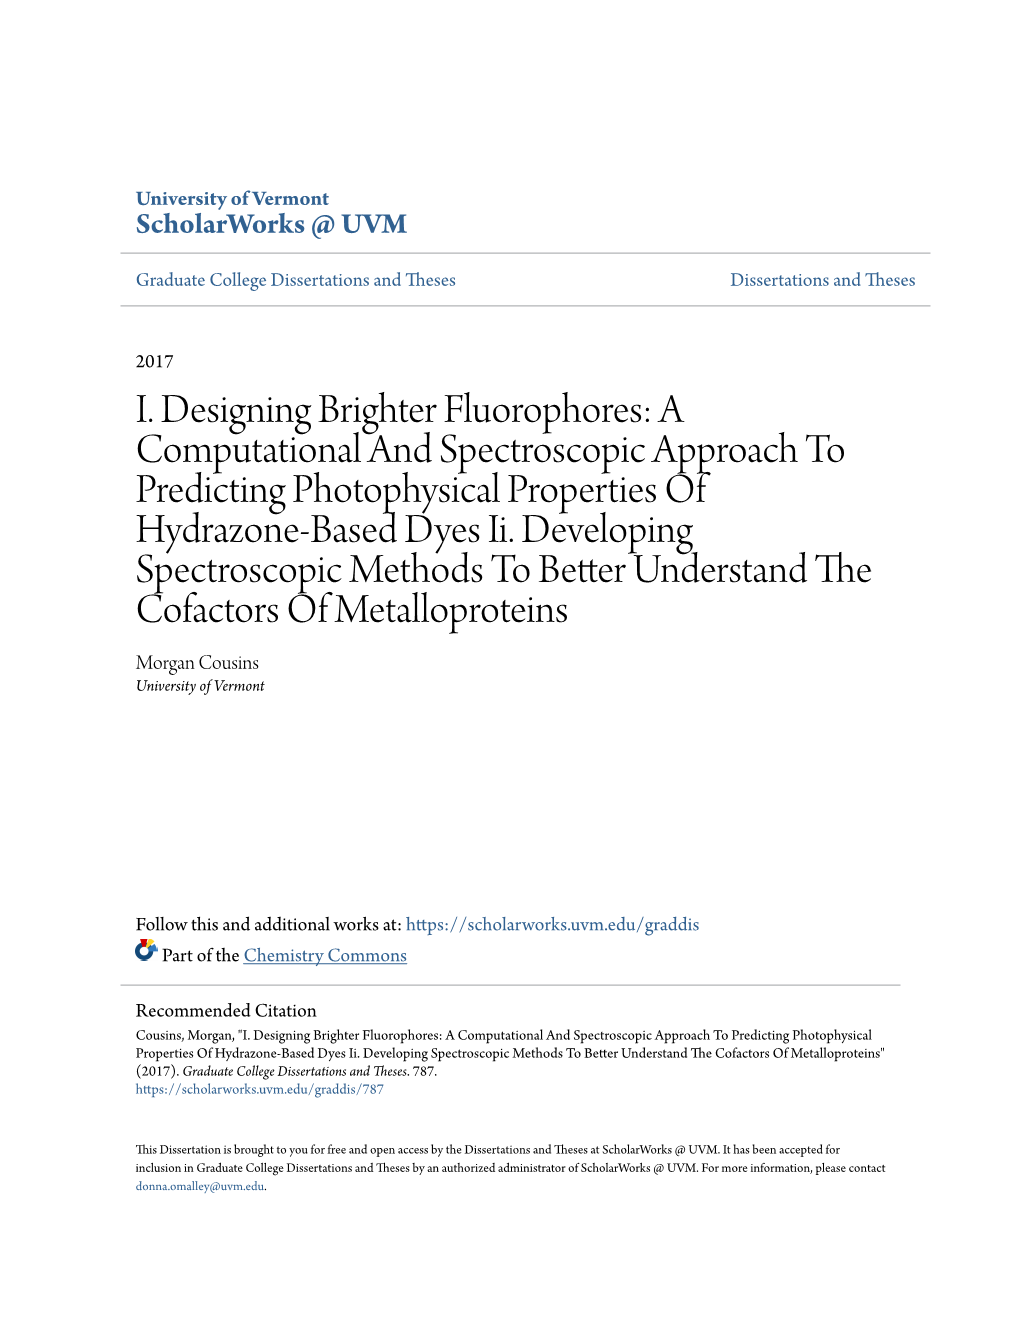 I. Designing Brighter Fluorophores: a Computational and Spectroscopic Approach to Predicting Photophysical Properties of Hydrazone-Based Dyes Ii